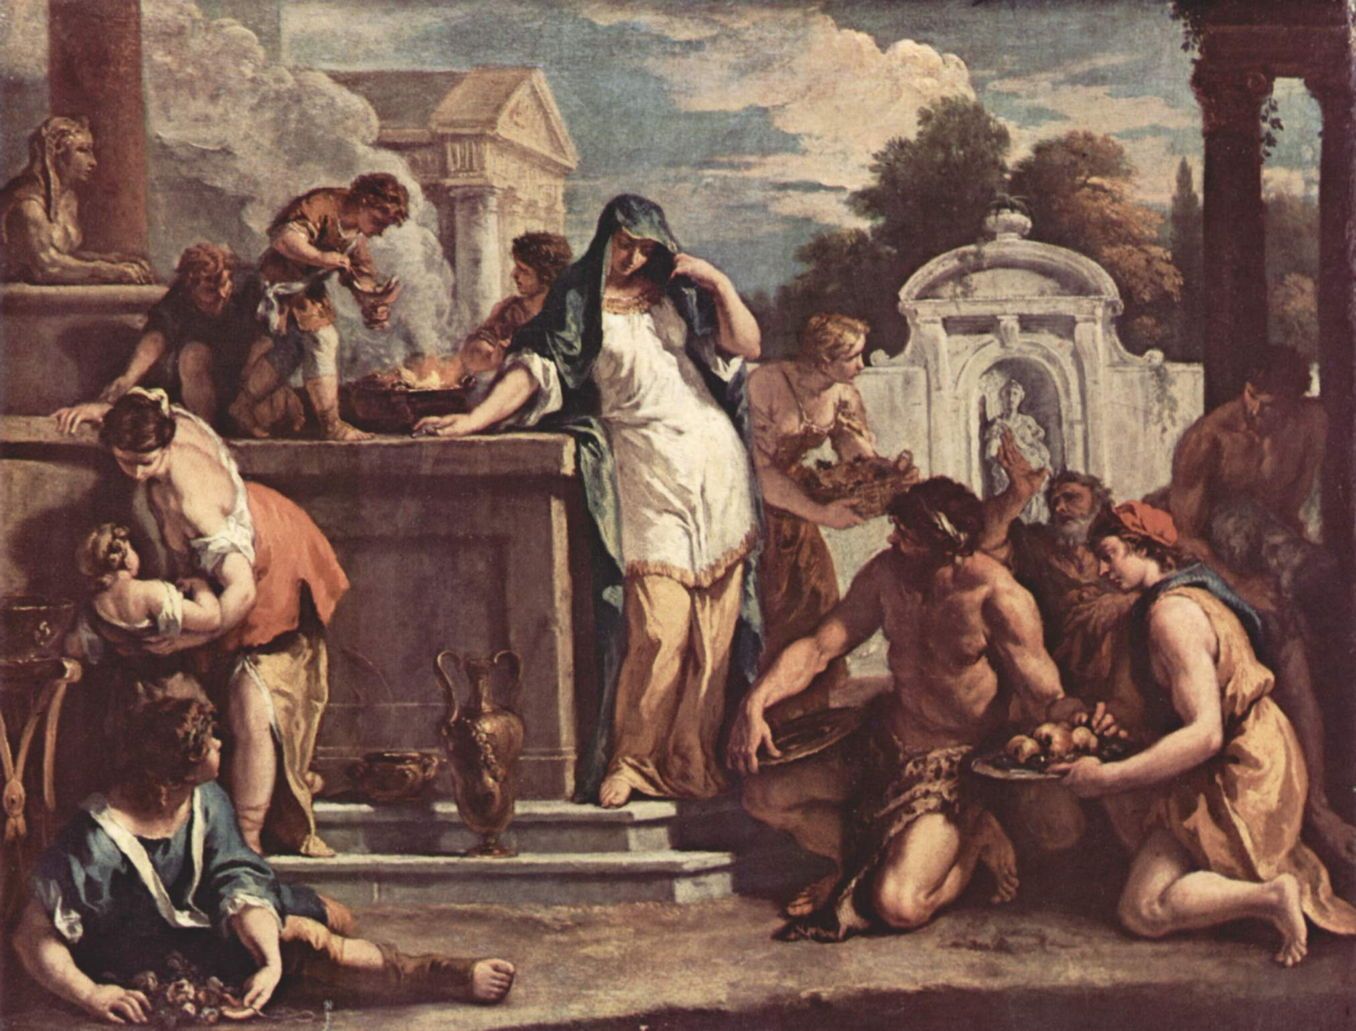 A painting of a woman in a white dress and green veil standing at a fountain with a bare-chested man and robed woman on their knees in front of her offering her a platter of fruits. Women, men and children in the background in various poses